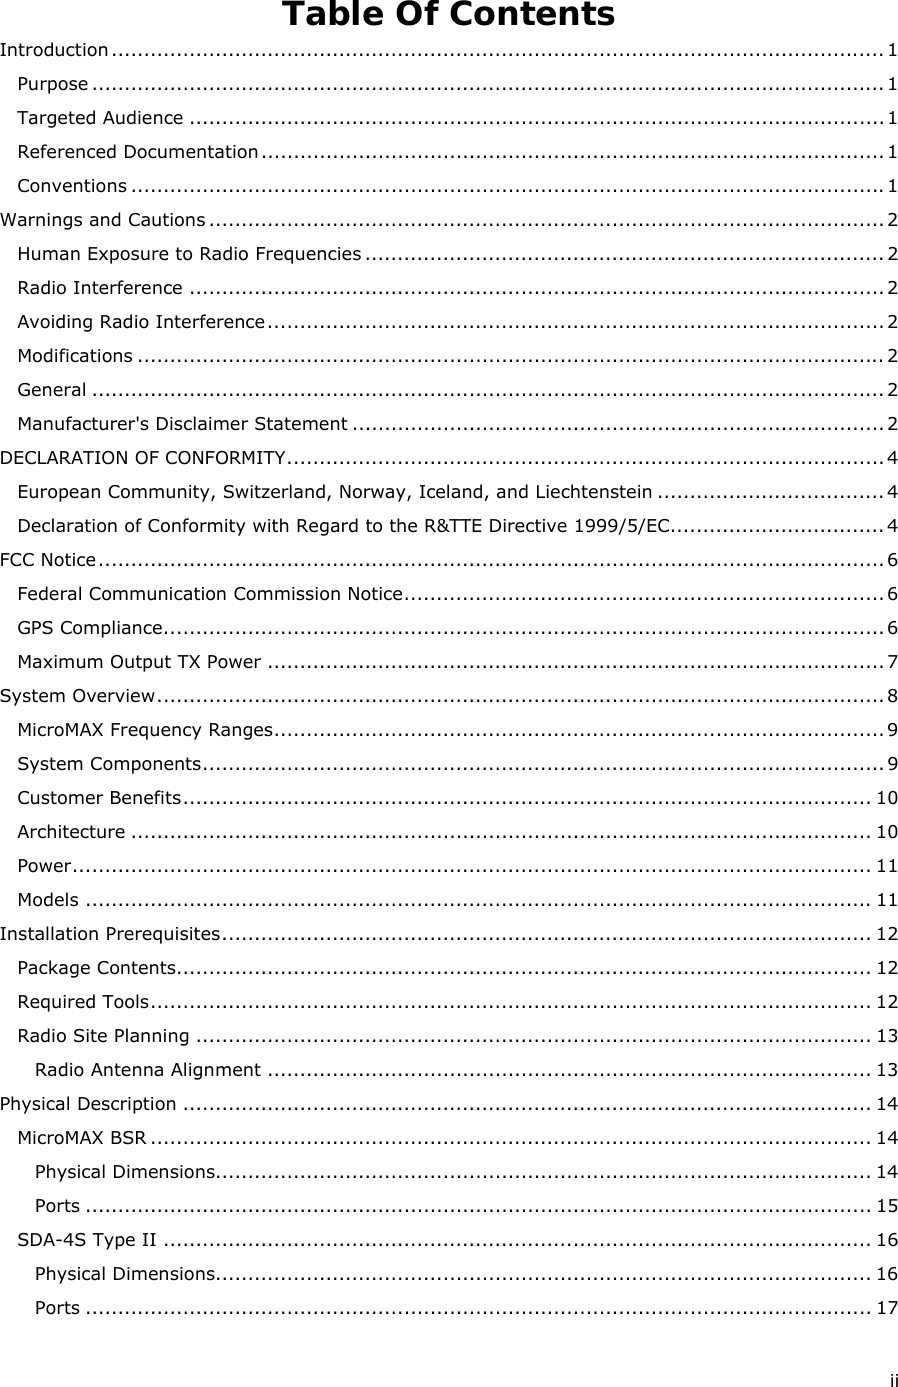  ii Table Of Contents Introduction ....................................................................................................................... 1 Purpose .......................................................................................................................... 1 Targeted Audience ........................................................................................................... 1 Referenced Documentation ................................................................................................ 1 Conventions .................................................................................................................... 1 Warnings and Cautions ........................................................................................................ 2 Human Exposure to Radio Frequencies ................................................................................ 2 Radio Interference ........................................................................................................... 2 Avoiding Radio Interference ............................................................................................... 2 Modifications ................................................................................................................... 2 General .......................................................................................................................... 2 Manufacturer&apos;s Disclaimer Statement .................................................................................. 2 DECLARATION OF CONFORMITY ............................................................................................ 4 European Community, Switzerland, Norway, Iceland, and Liechtenstein ................................... 4 Declaration of Conformity with Regard to the R&amp;TTE Directive 1999/5/EC ................................. 4 FCC Notice ......................................................................................................................... 6 Federal Communication Commission Notice .......................................................................... 6 GPS Compliance ............................................................................................................... 6 Maximum Output TX Power ............................................................................................... 7 System Overview ................................................................................................................ 8 MicroMAX Frequency Ranges .............................................................................................. 9 System Components ......................................................................................................... 9 Customer Benefits .......................................................................................................... 10 Architecture .................................................................................................................. 10 Power ........................................................................................................................... 11 Models ......................................................................................................................... 11 Installation Prerequisites .................................................................................................... 12 Package Contents........................................................................................................... 12 Required Tools ............................................................................................................... 12 Radio Site Planning ........................................................................................................ 13 Radio Antenna Alignment ............................................................................................. 13 Physical Description .......................................................................................................... 14 MicroMAX BSR ............................................................................................................... 14 Physical Dimensions..................................................................................................... 14 Ports ......................................................................................................................... 15 SDA-4S Type II ............................................................................................................. 16 Physical Dimensions..................................................................................................... 16 Ports ......................................................................................................................... 17 